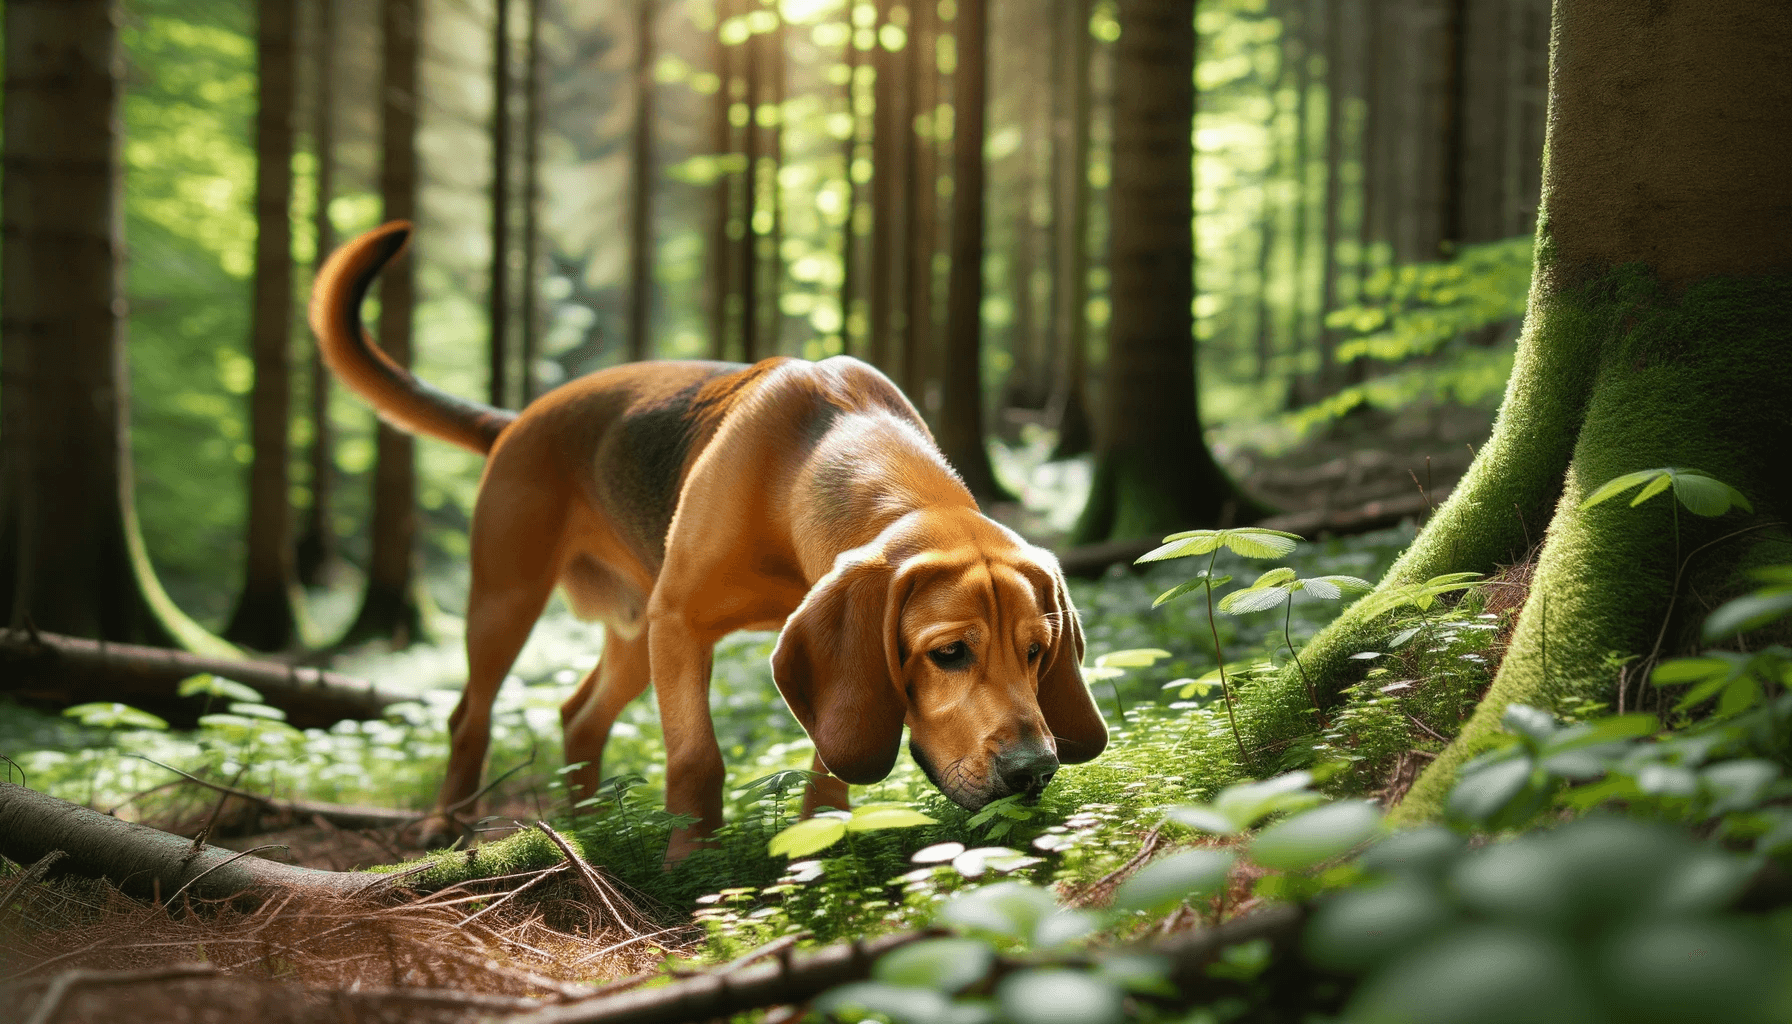 A Lab Hound Mix, possibly a bloodhound mix, keenly sniffing the ground in a natural setting